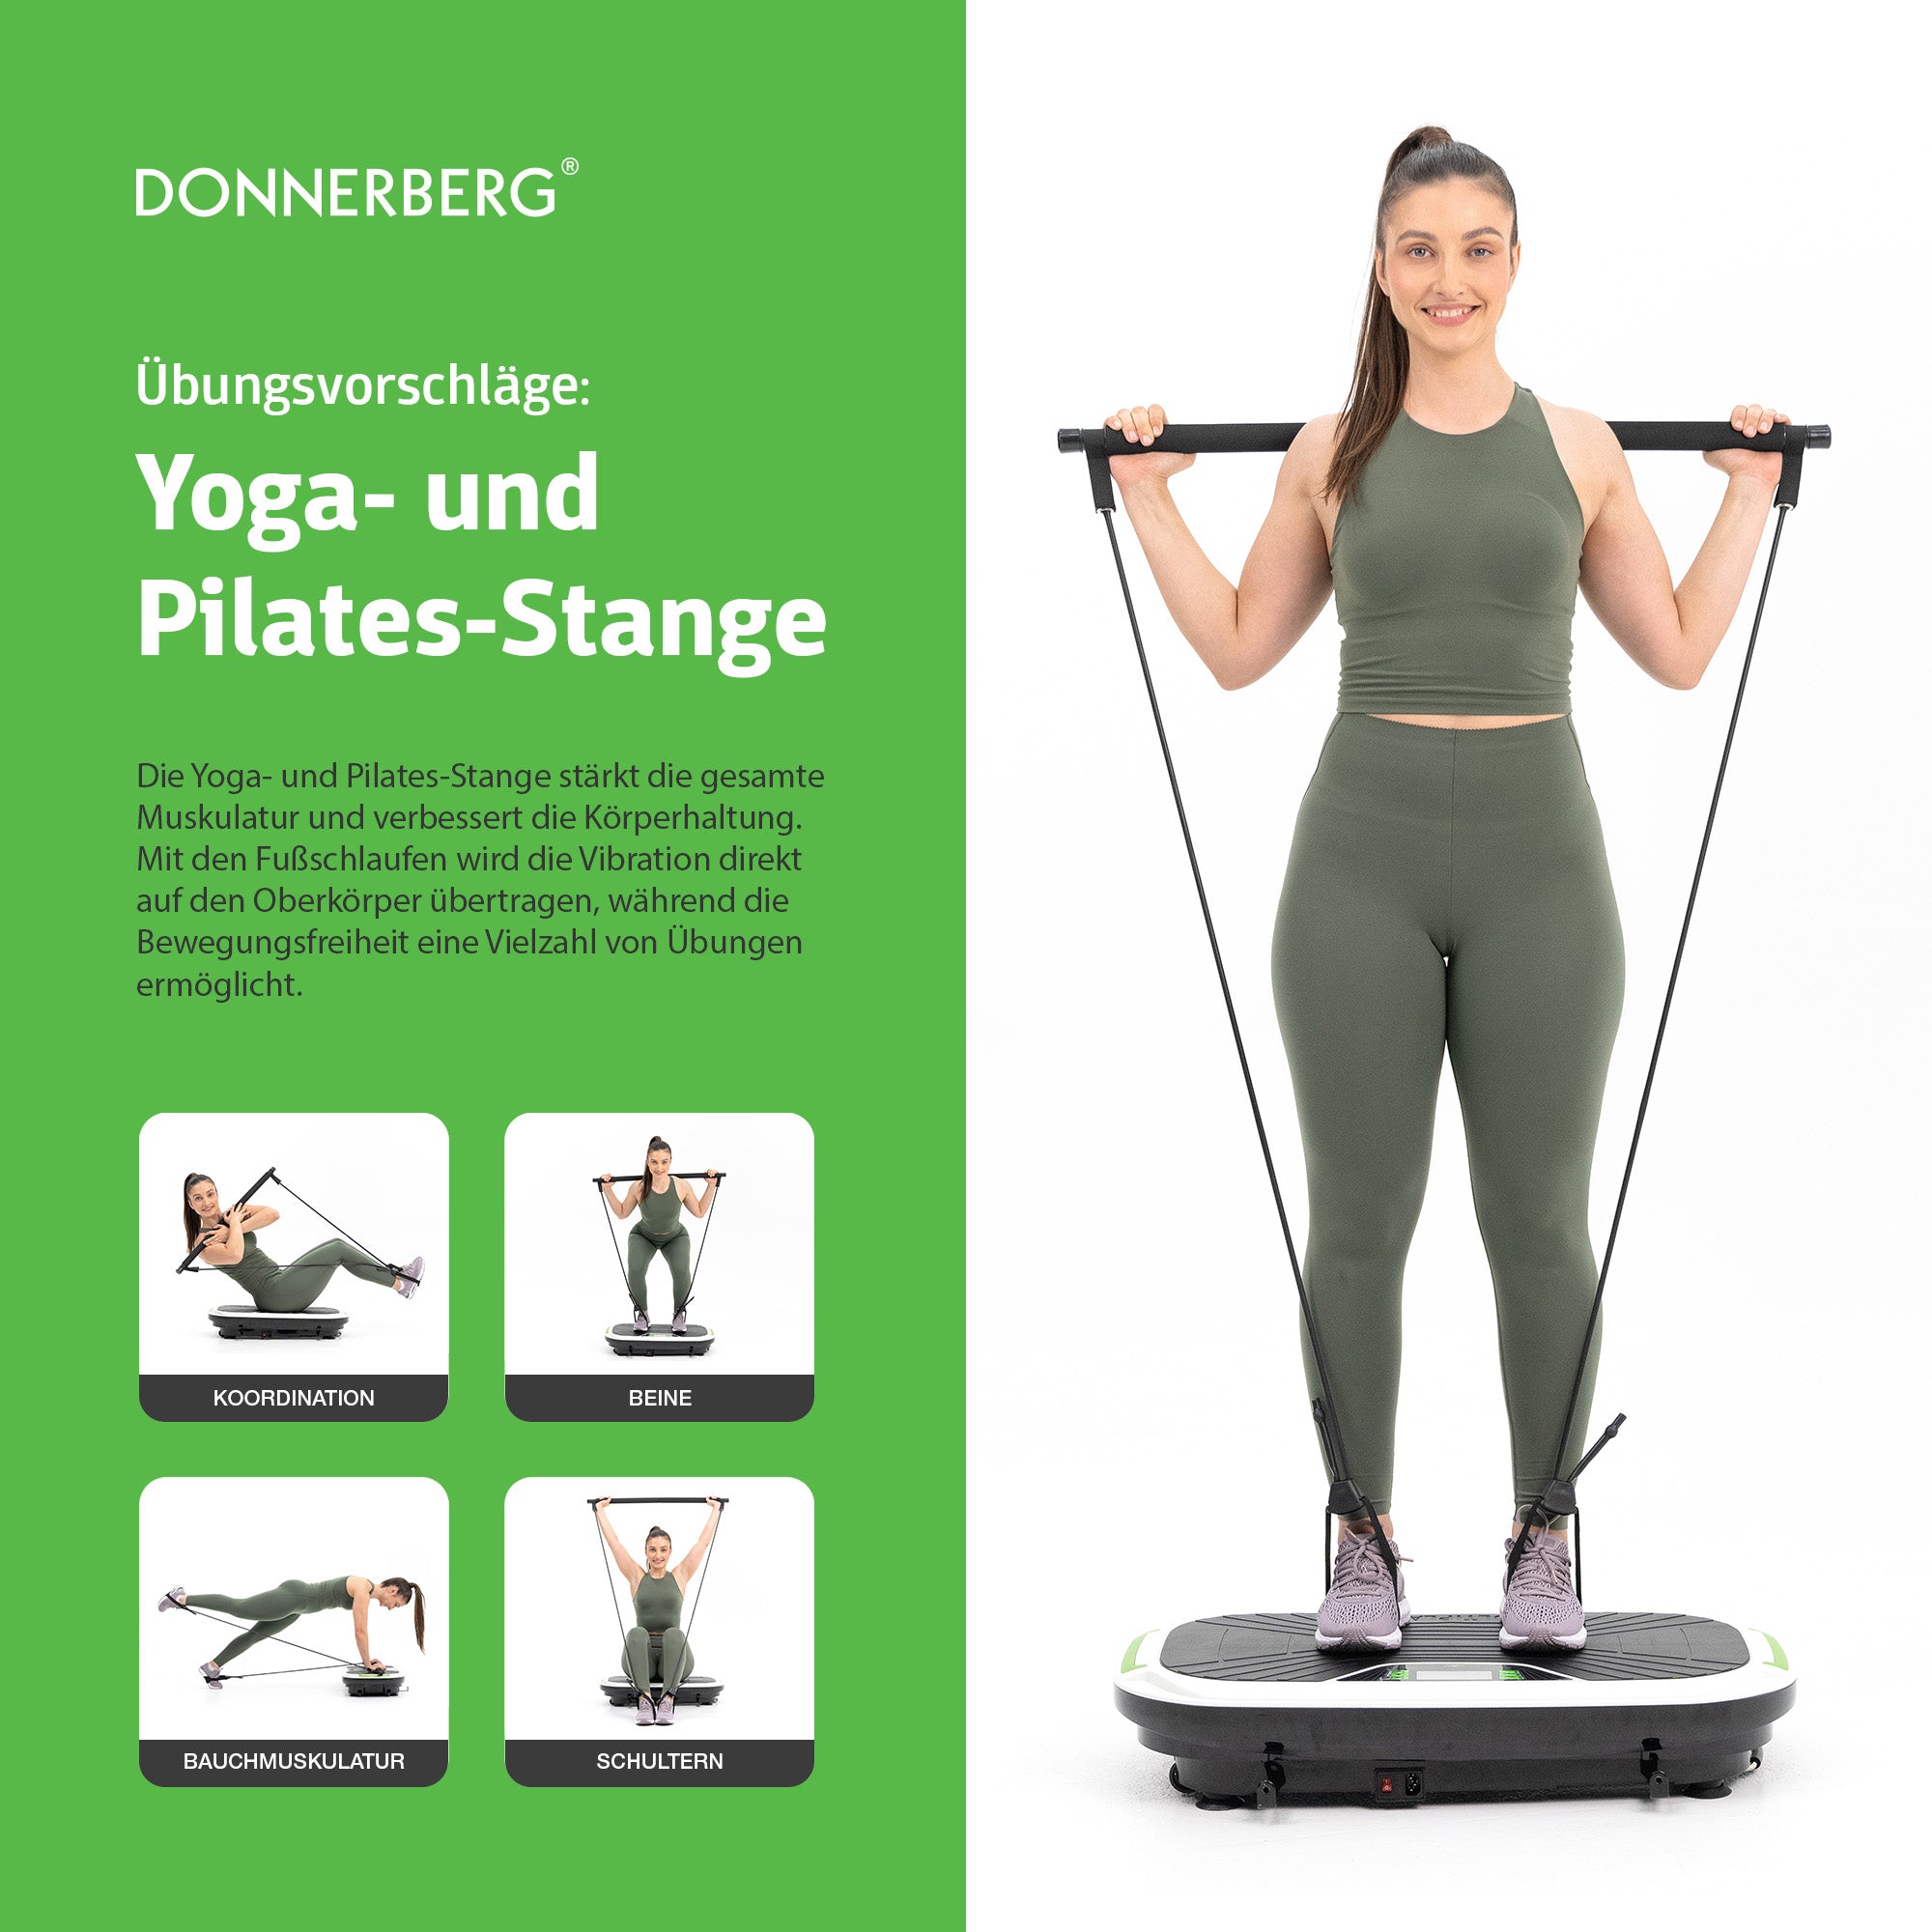 Recommendations for yoga and pilates bar exercises on vibration machine